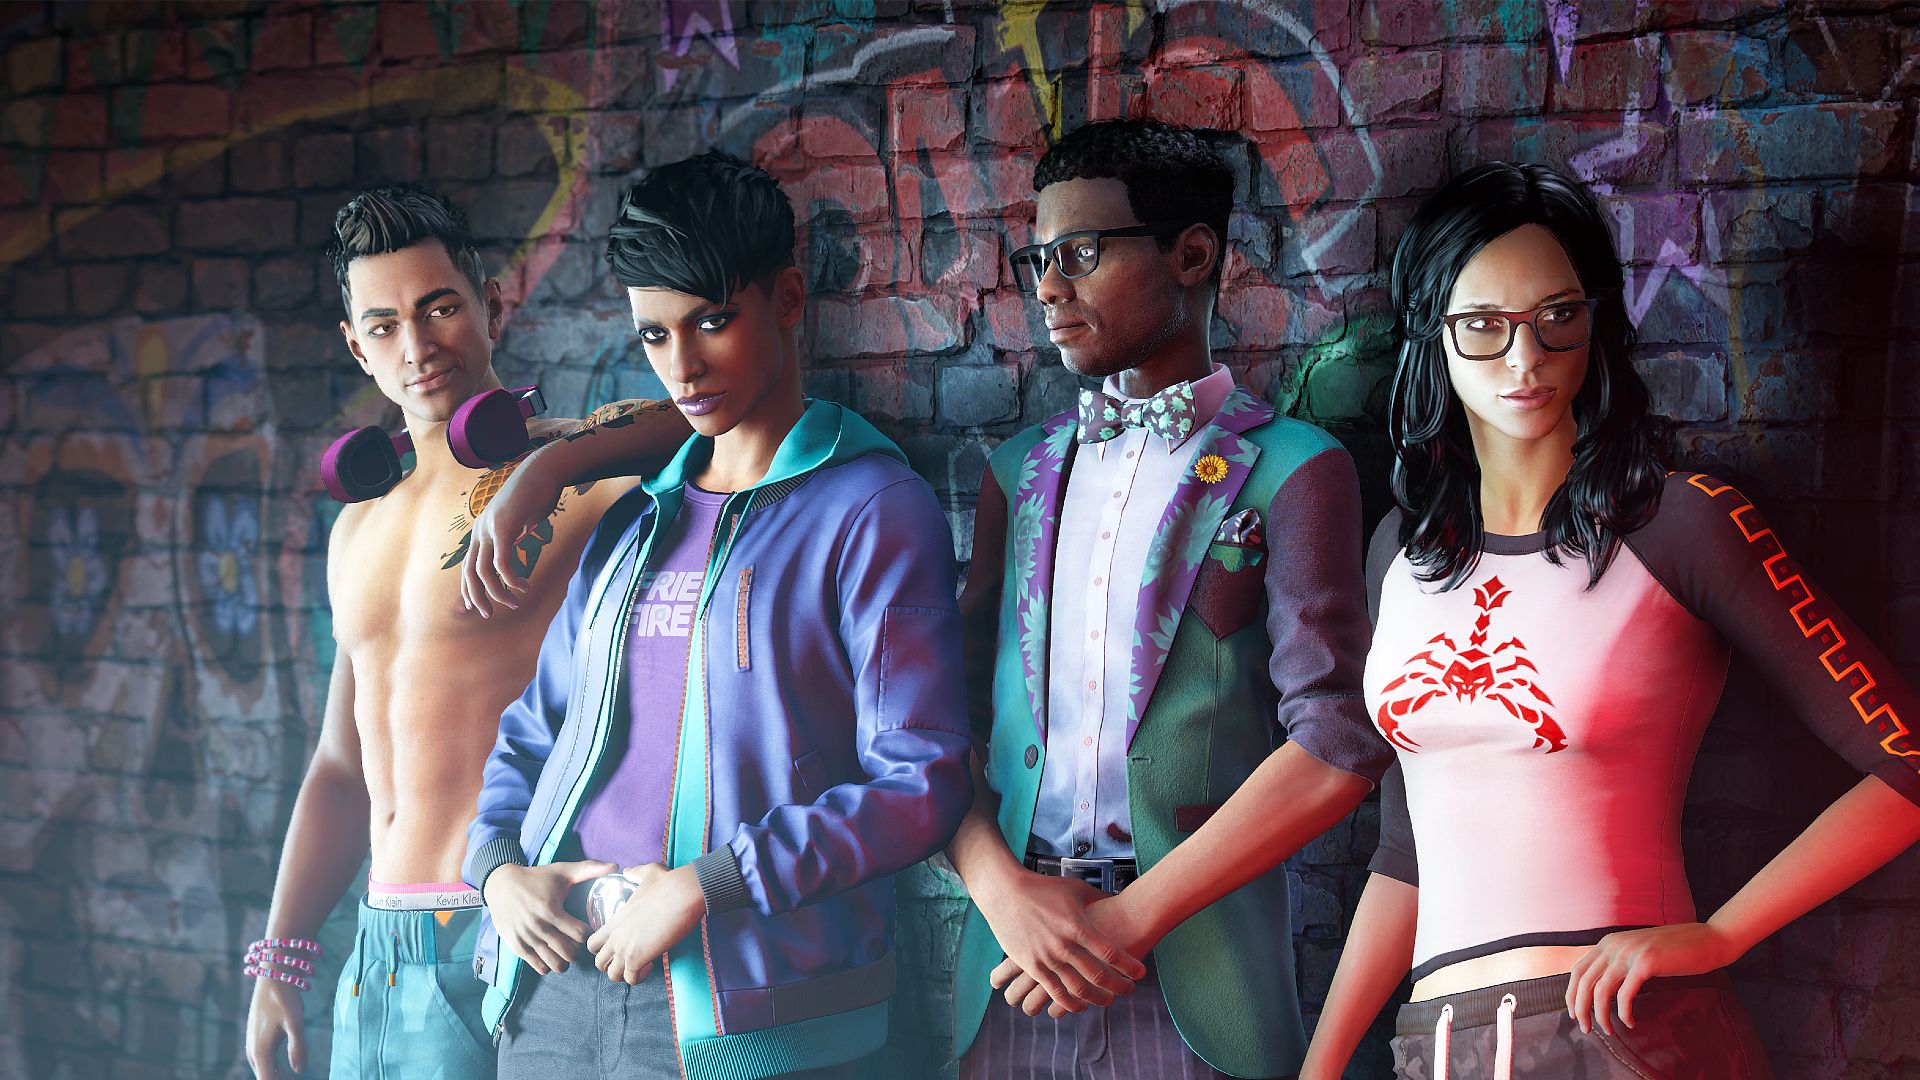 Saints Row’s new tone aims to deal with the struggles of modern life